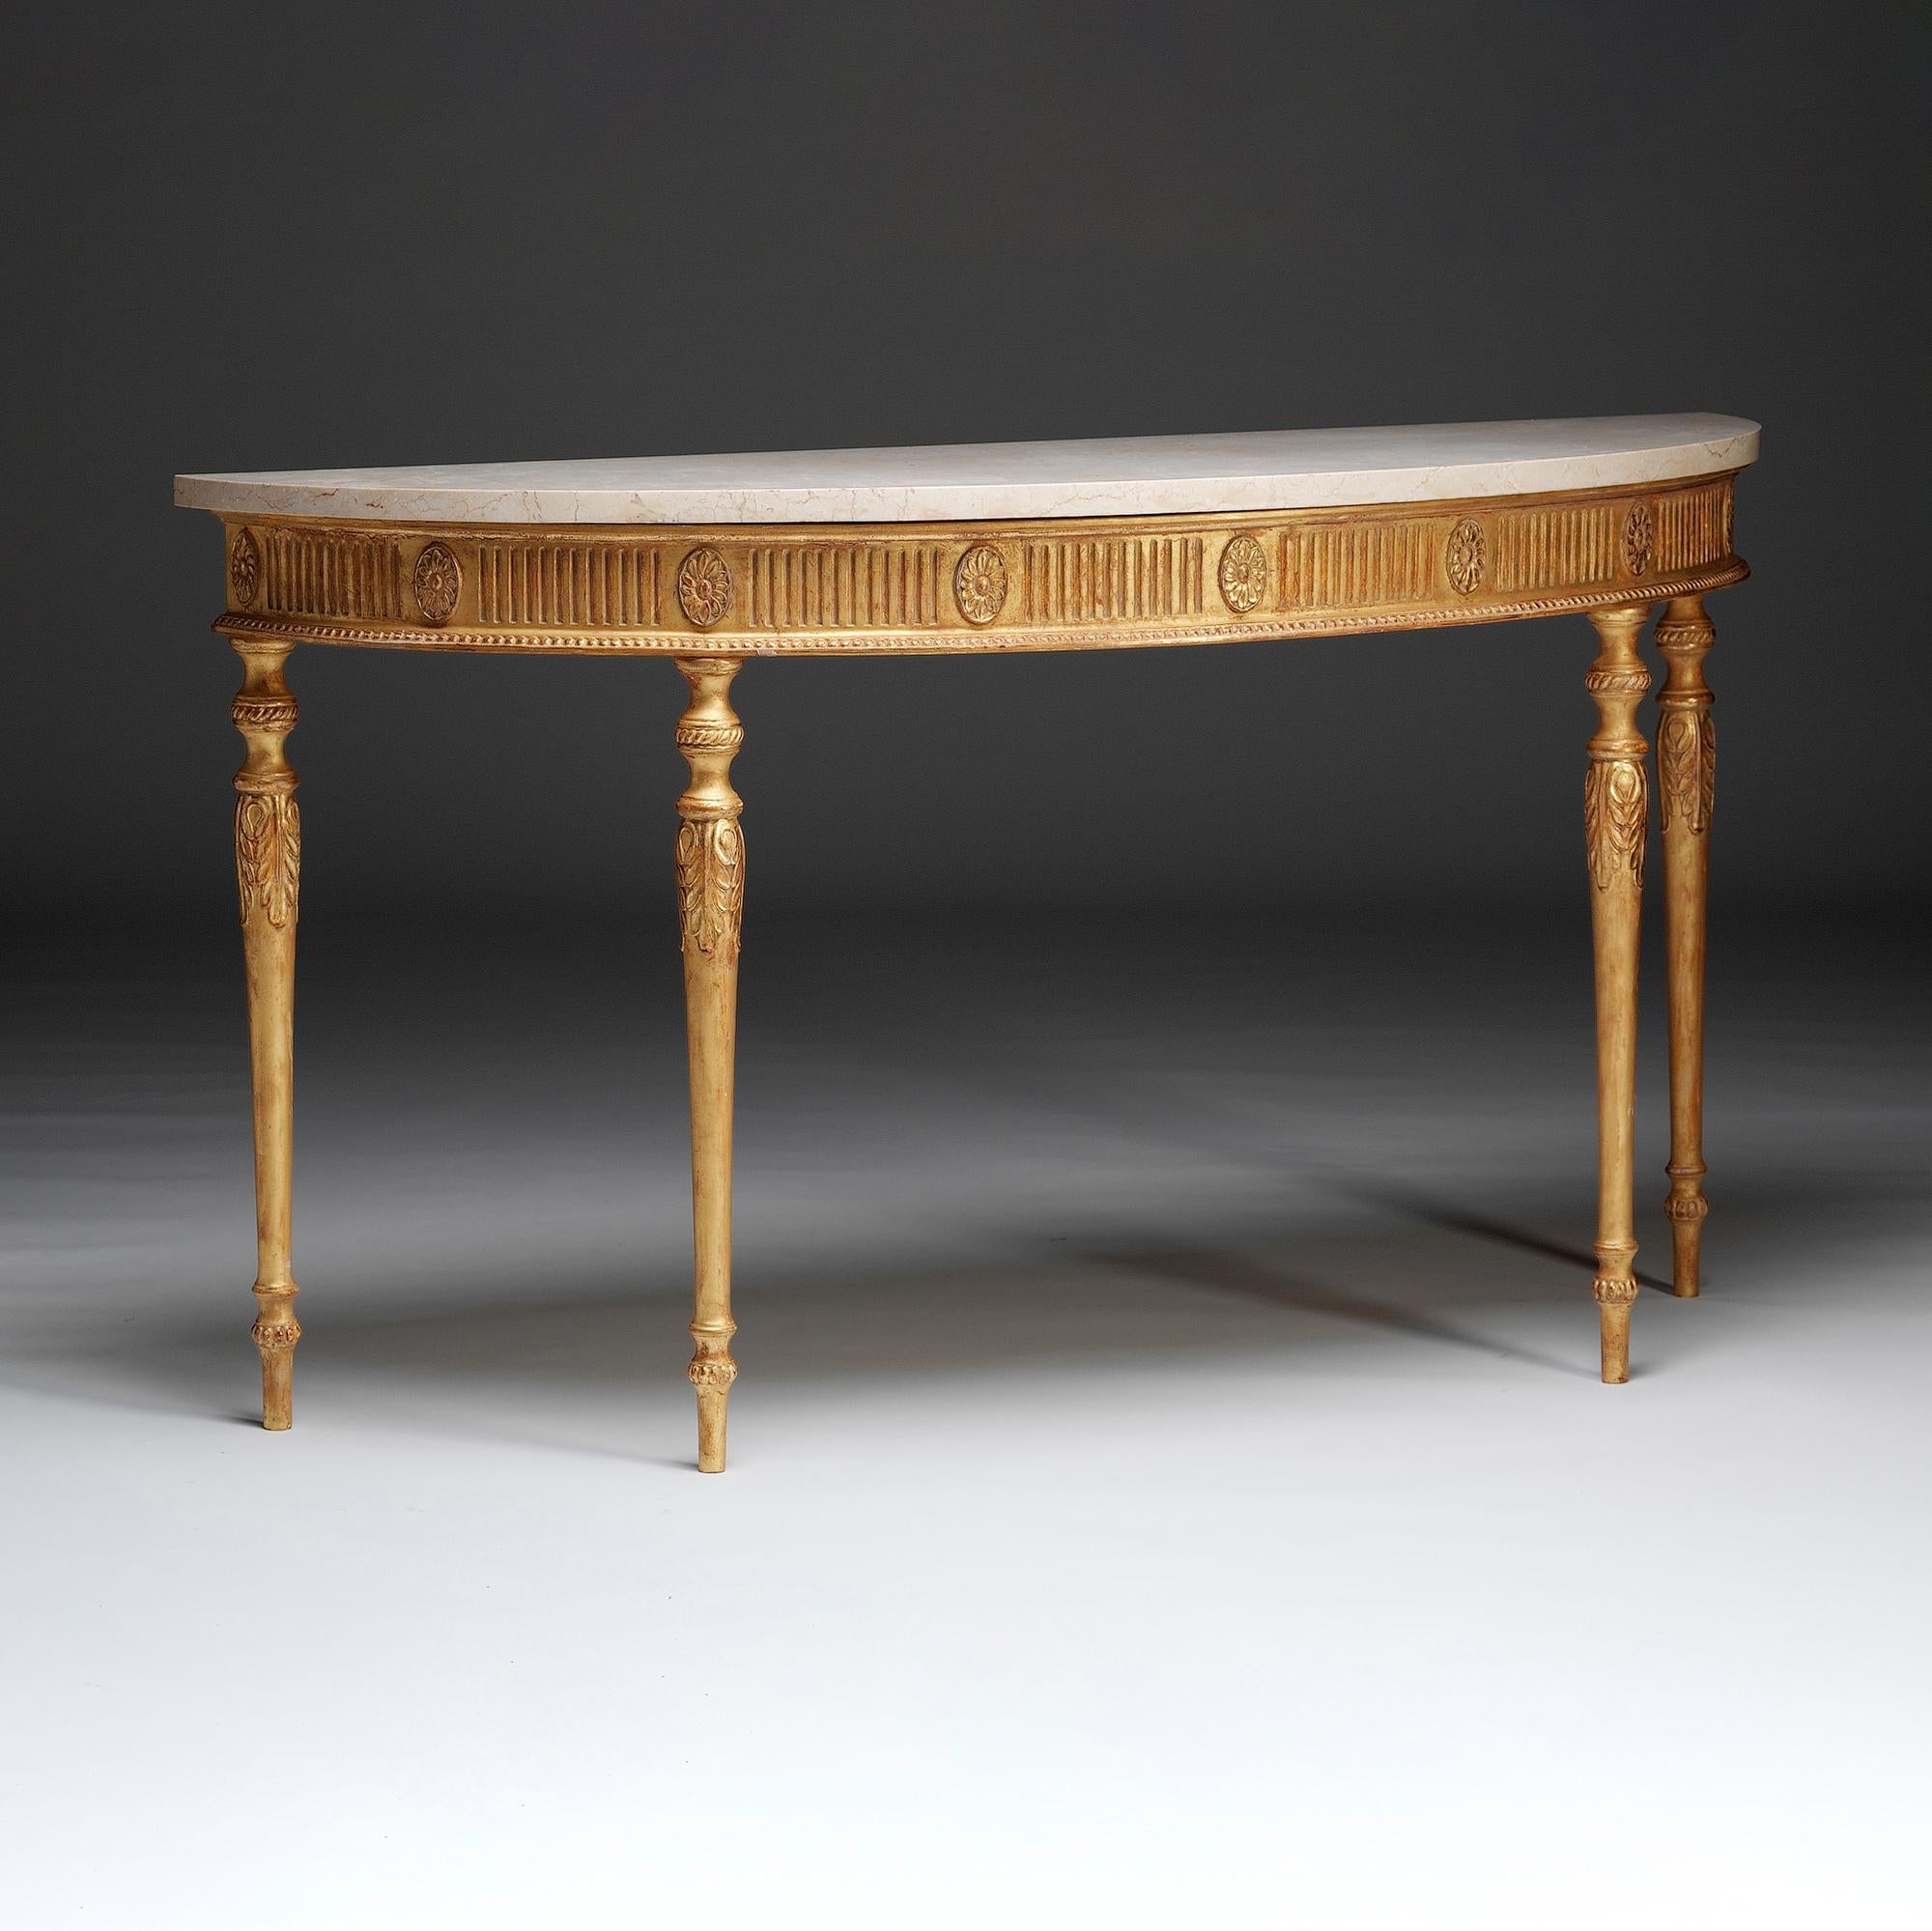 This semi elliptical, gilt-wood marble top side table in the style of George III and the influence of Robert Adam has a fluted frieze punctuated with flower-head paterae between carved mouldings. The turned and tapered legs are capped with acanthus